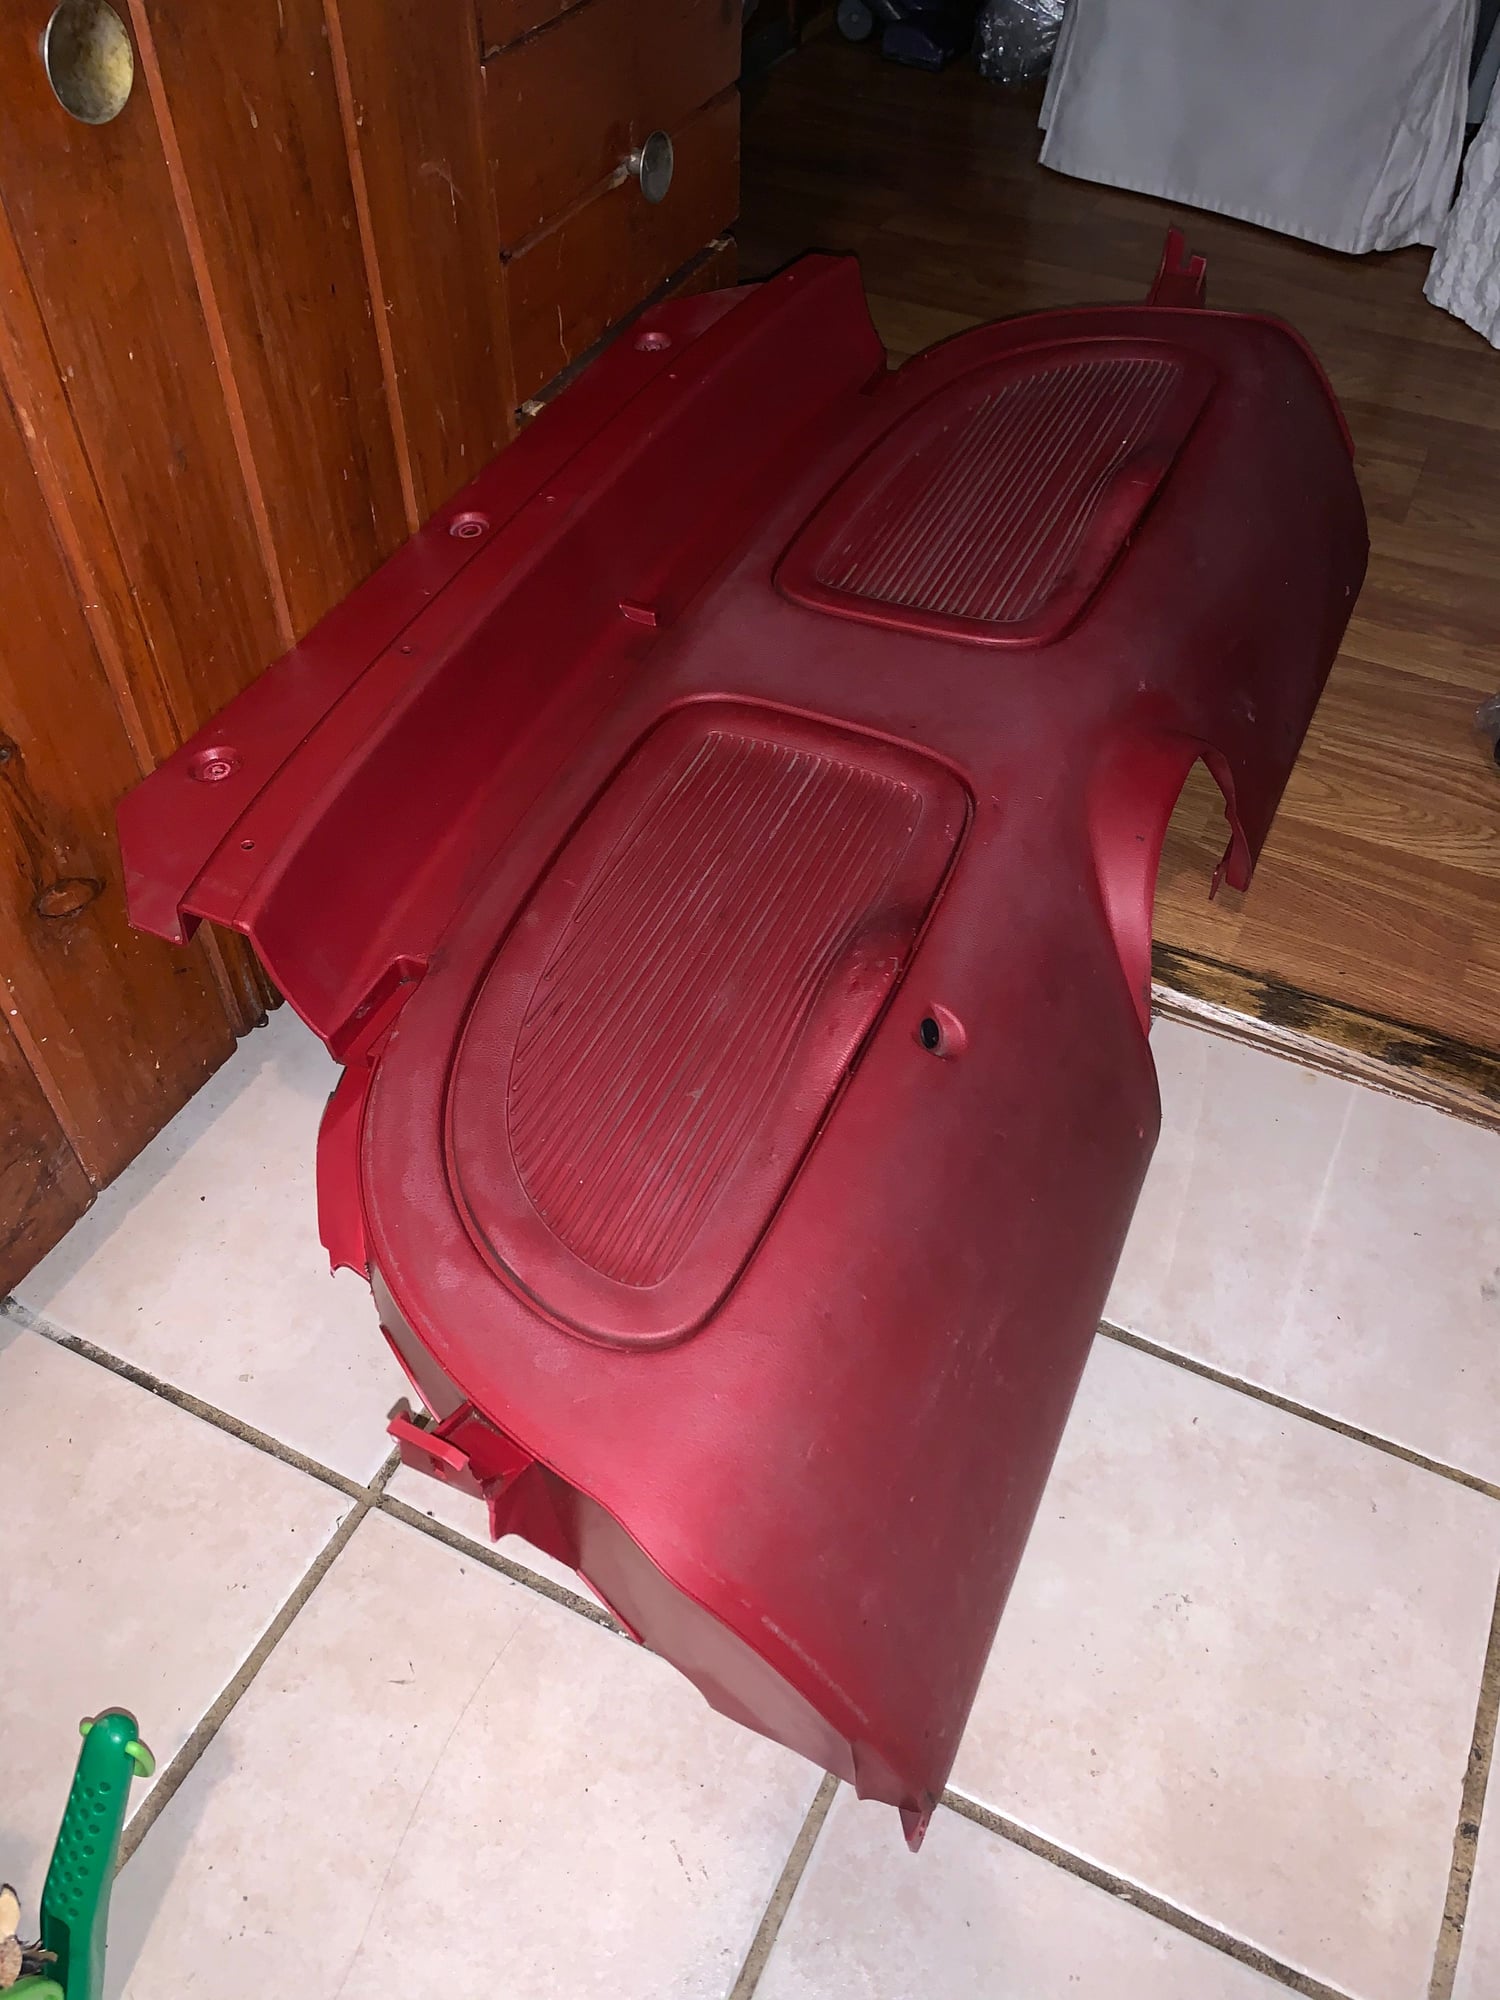 Interior/Upholstery - Red Storage Bins and Rear Quarter trims - Used - 1993 to 2002 Mazda RX-7 - Los Angeles, CA 91406, United States